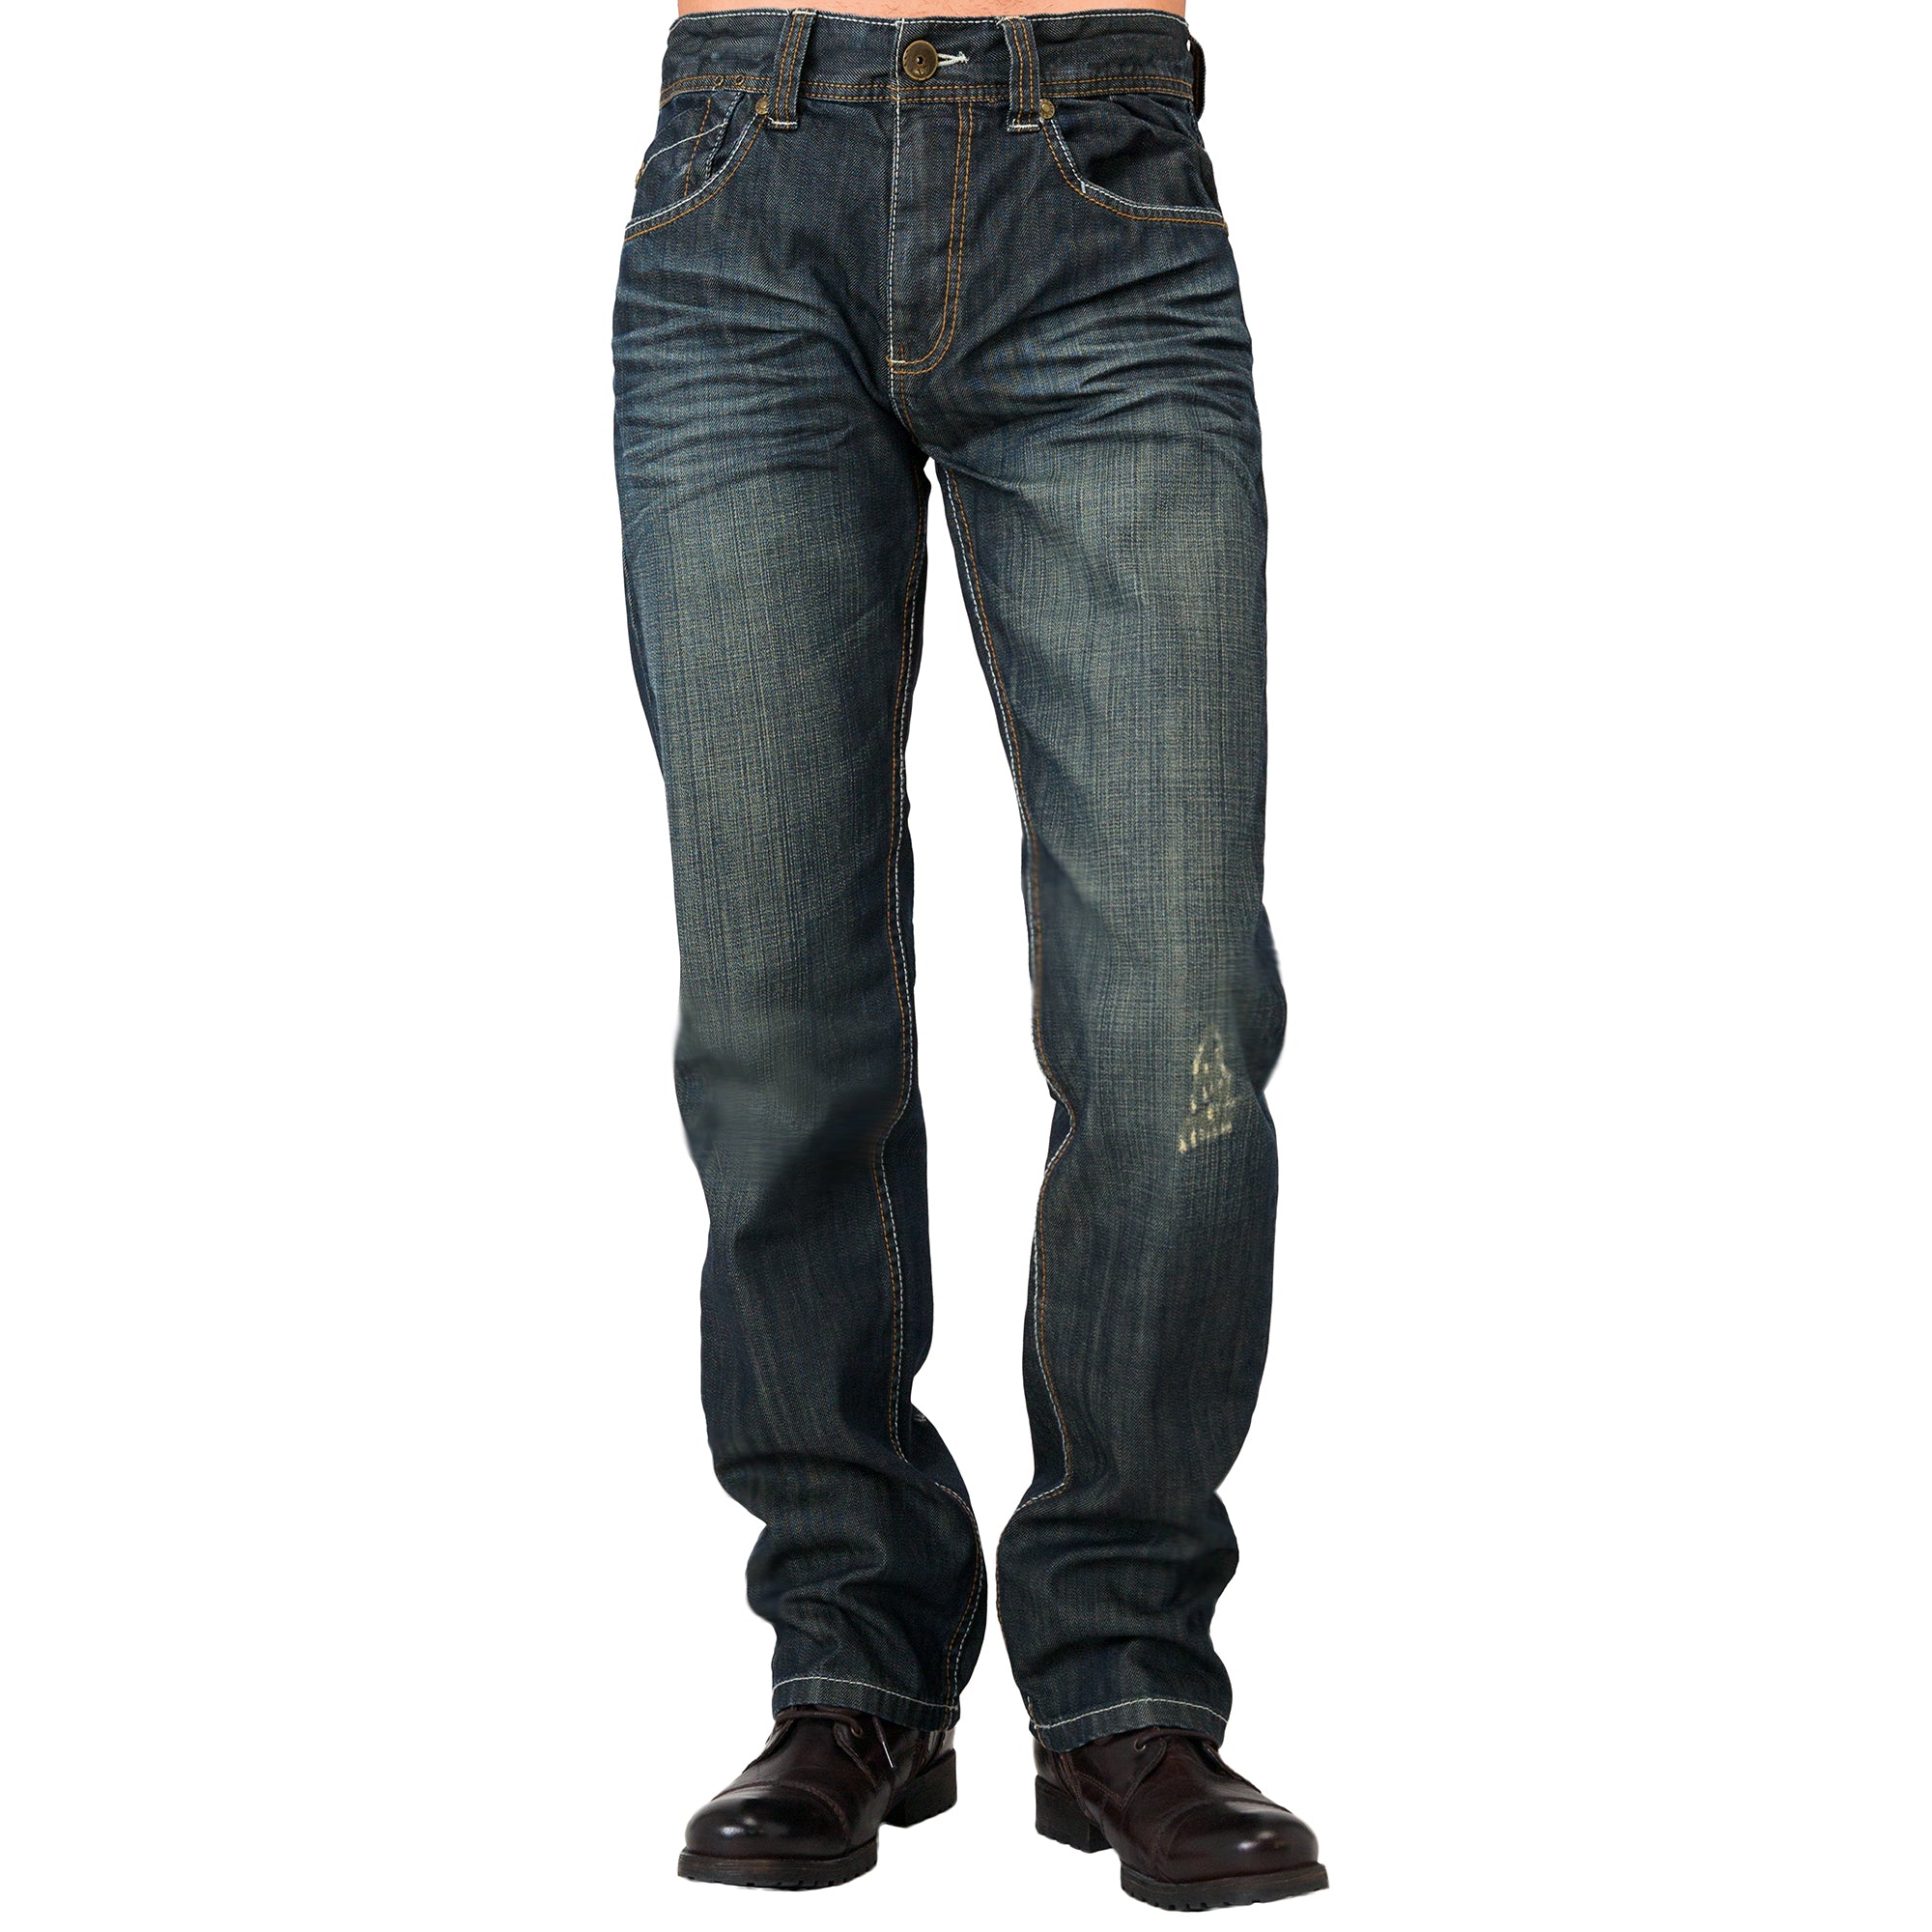 Ace Blue Stone Wash Whisker Jeans : Made To Measure Custom Jeans For Men &  Women, MakeYourOwnJeans®